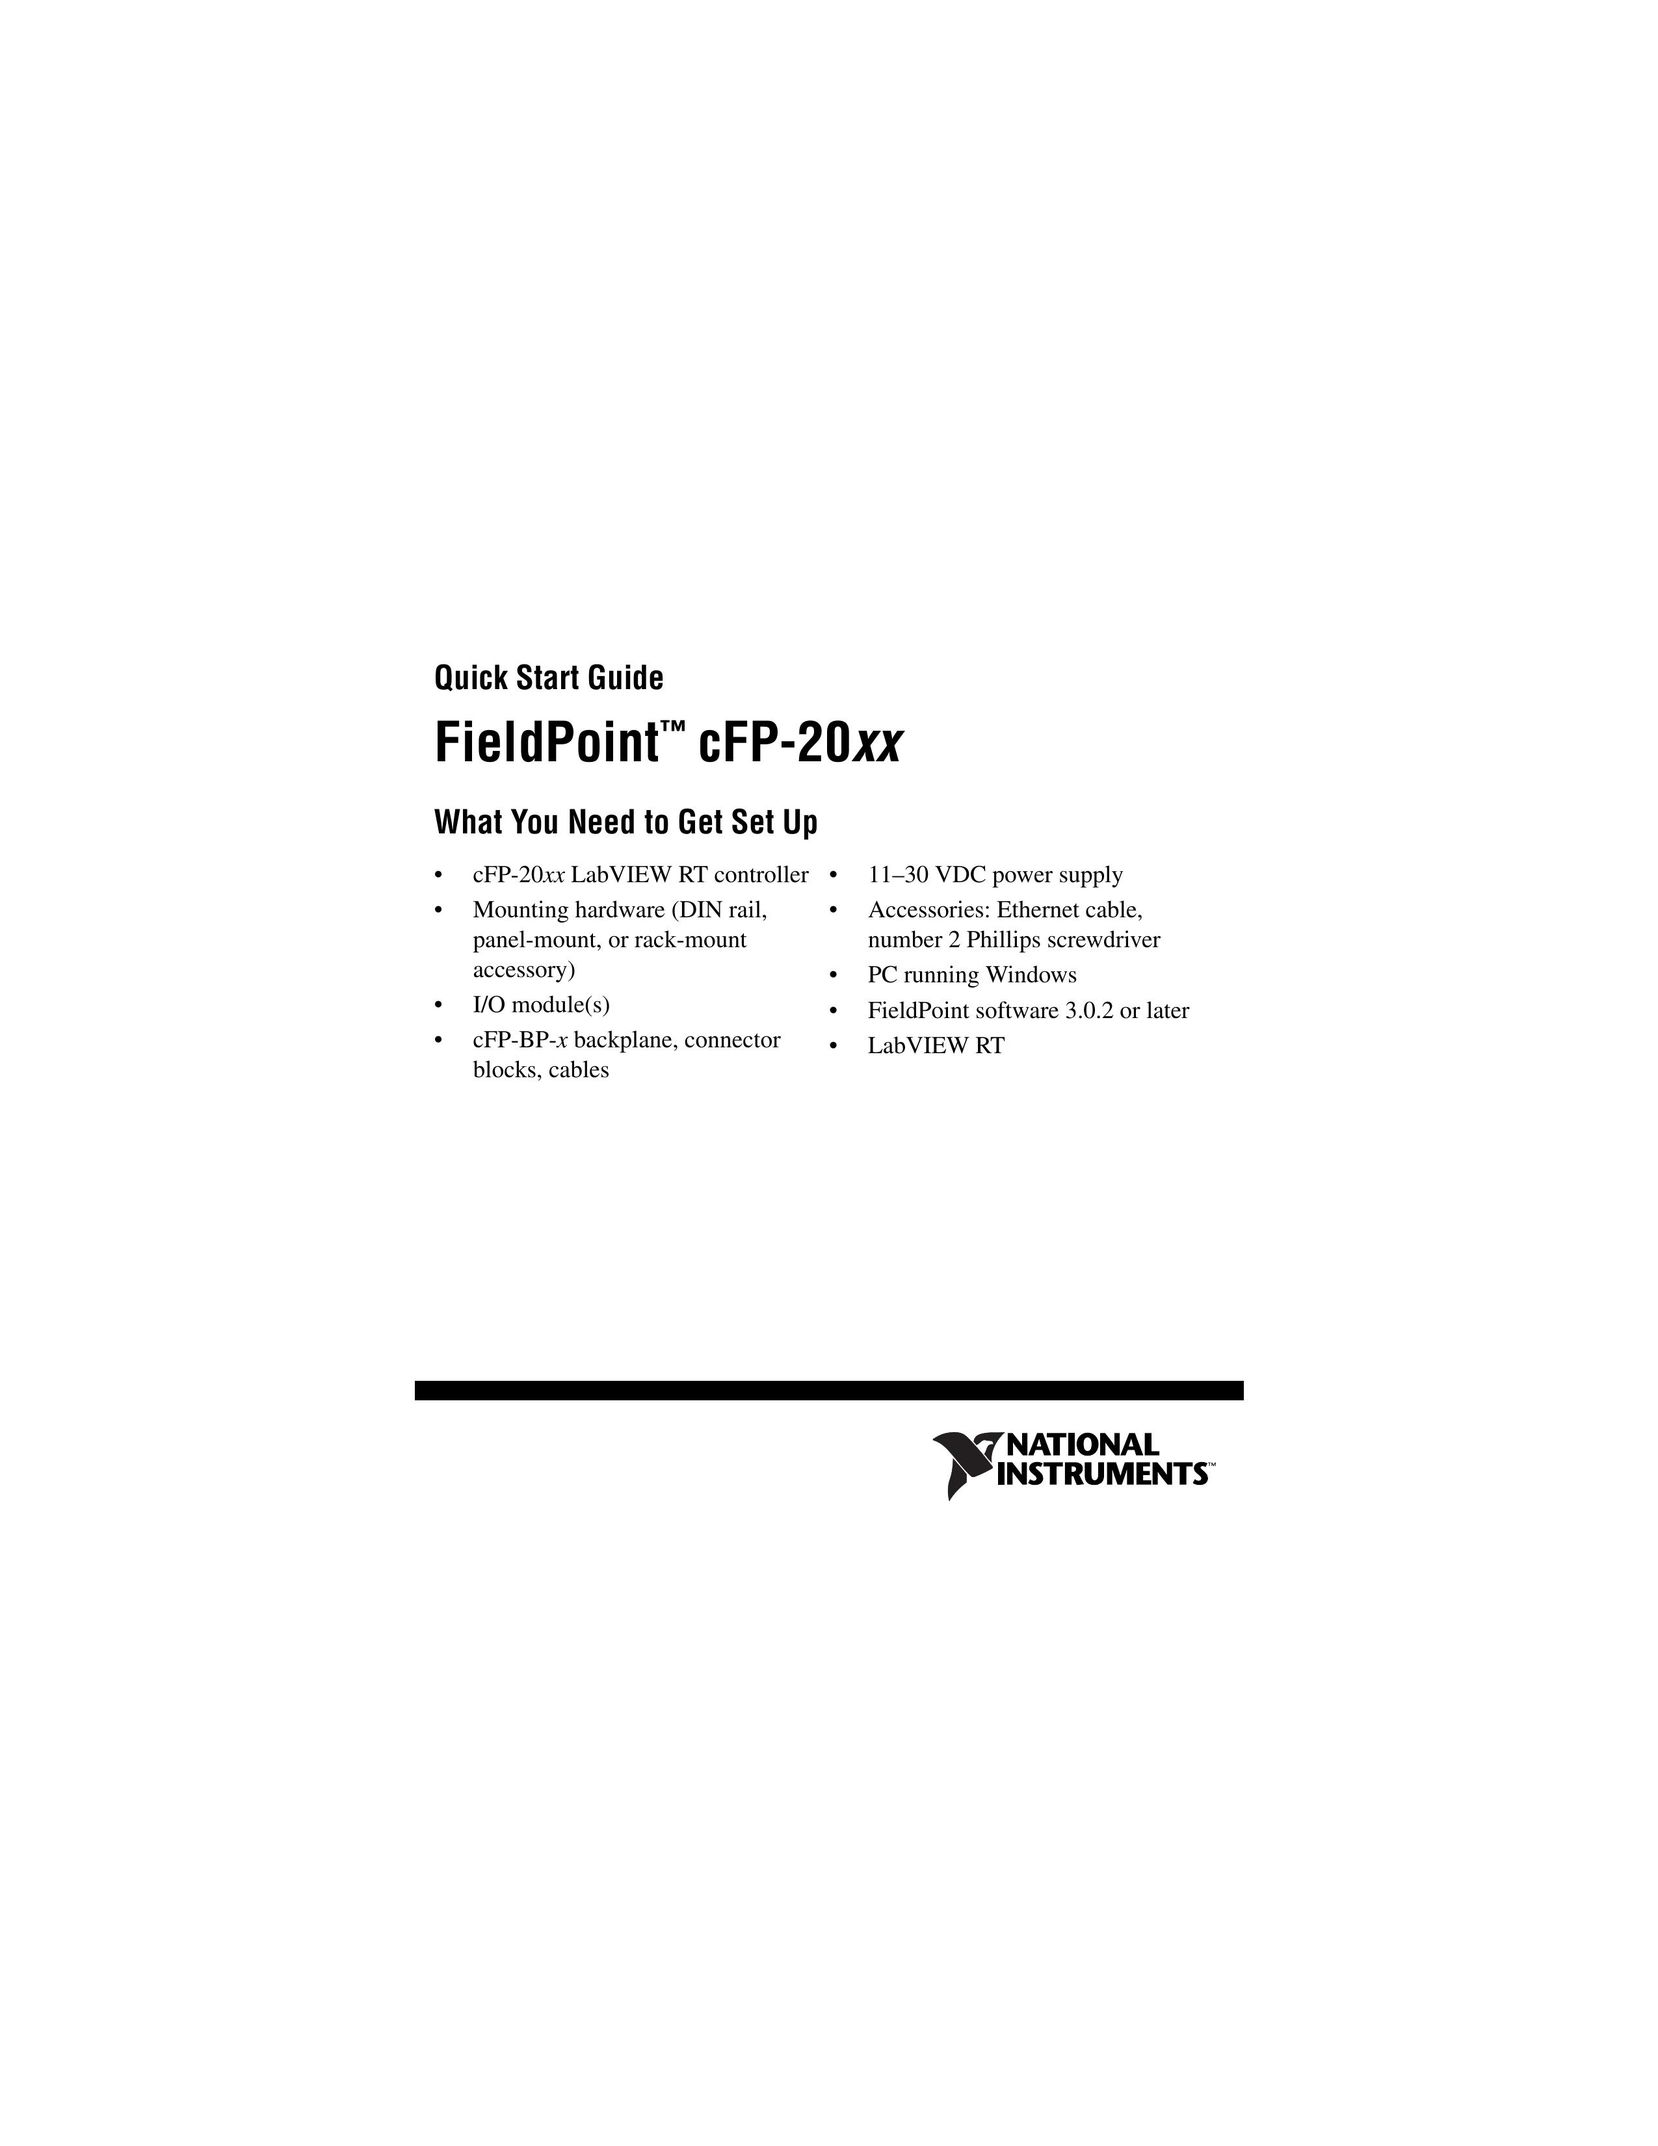 National Instruments cFP-20xx Network Card User Manual